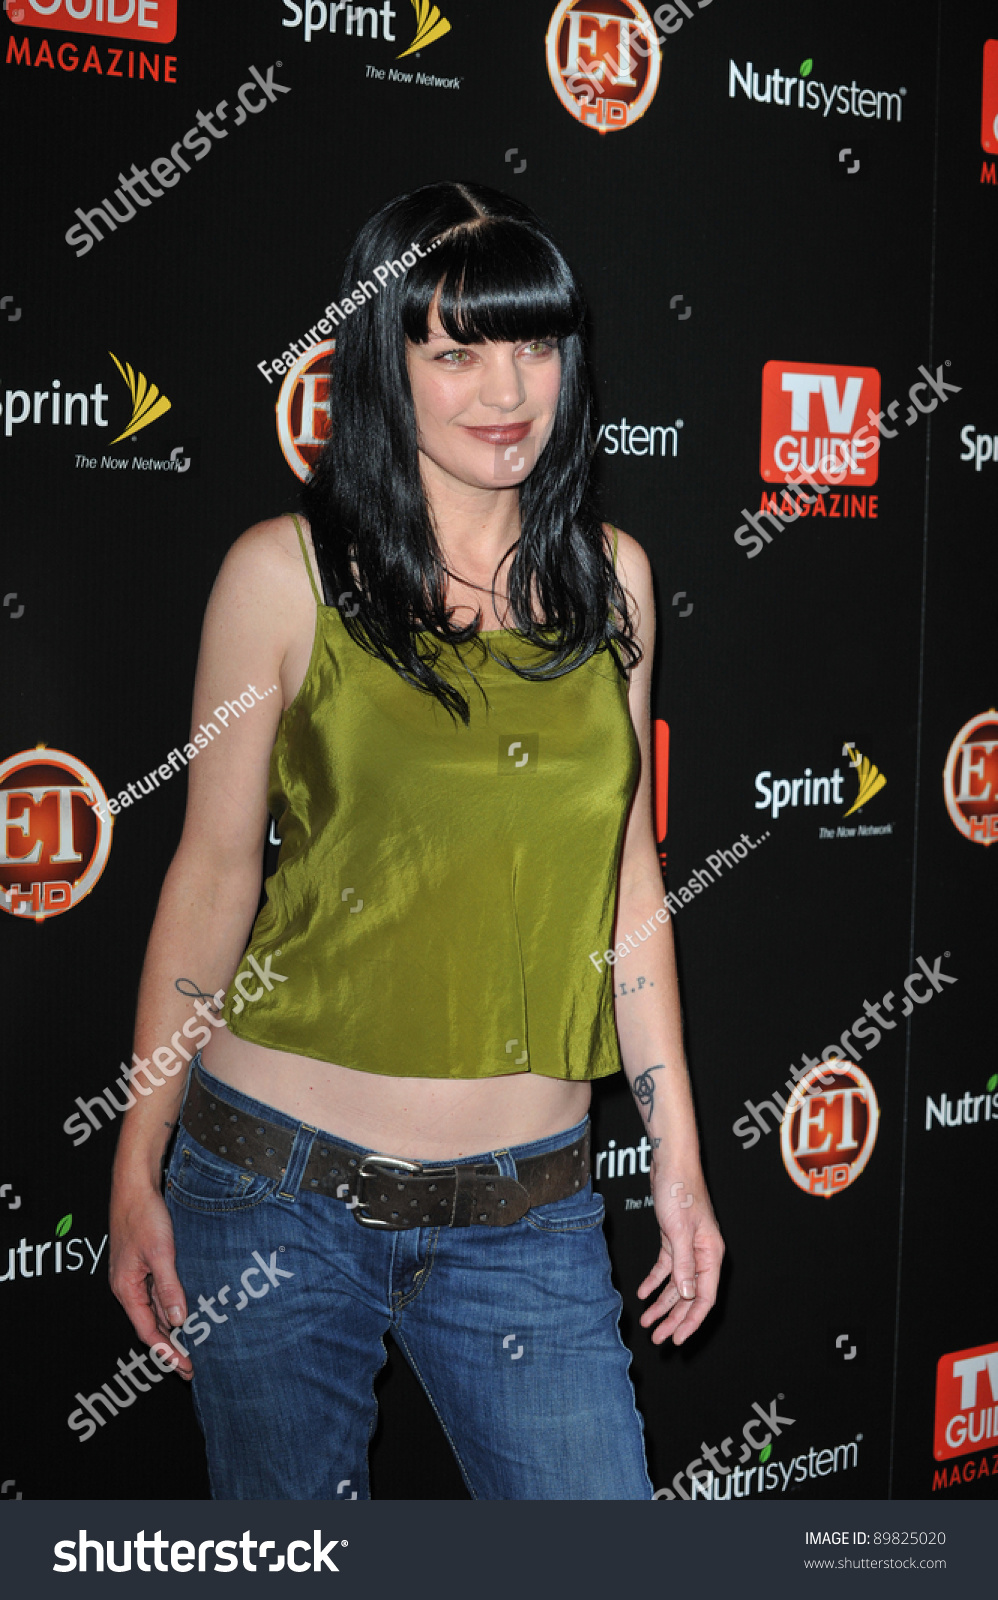 amir mohamed elsayed share pauley perrette hot photo photos